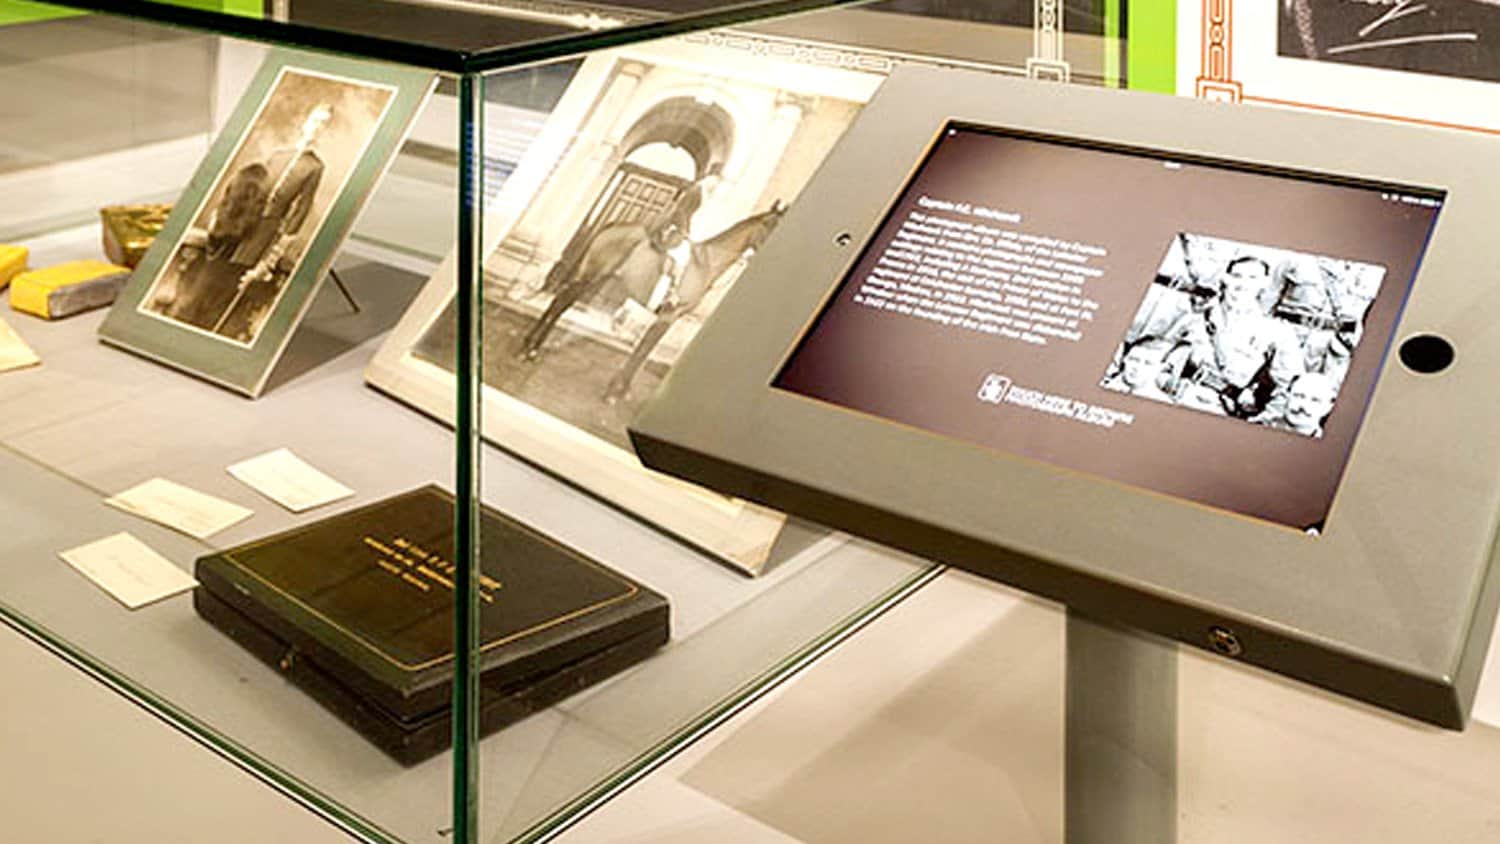 Museum Interactive Software developed for iPad